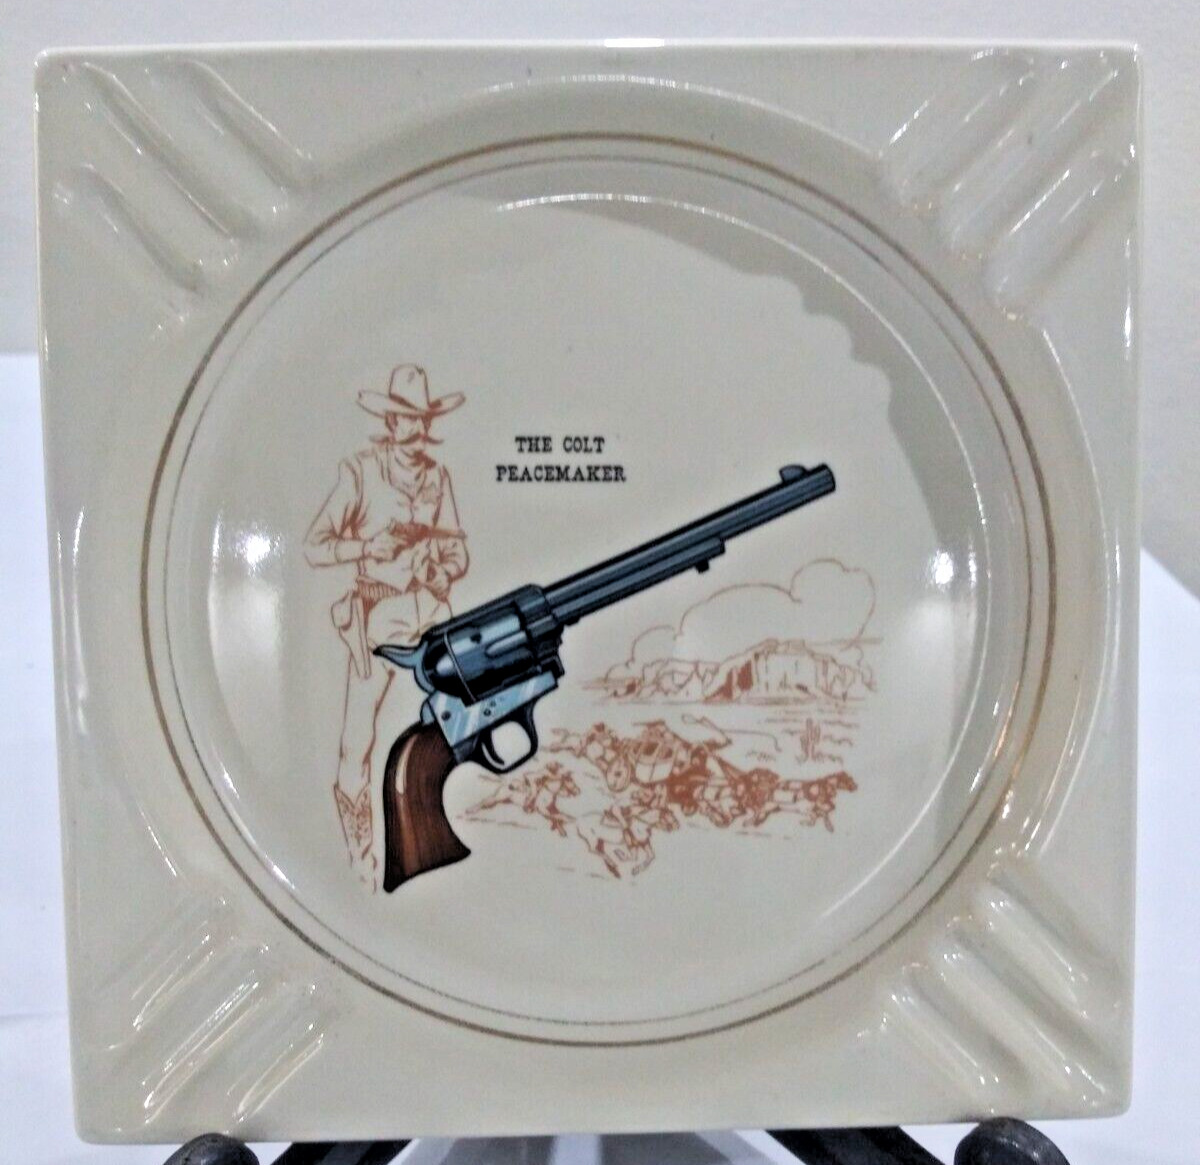 Colt 45 Peacemaker, Stagecoach, Sheriff, Vintage Hyalyn Porcelain Ashtray, 7.25